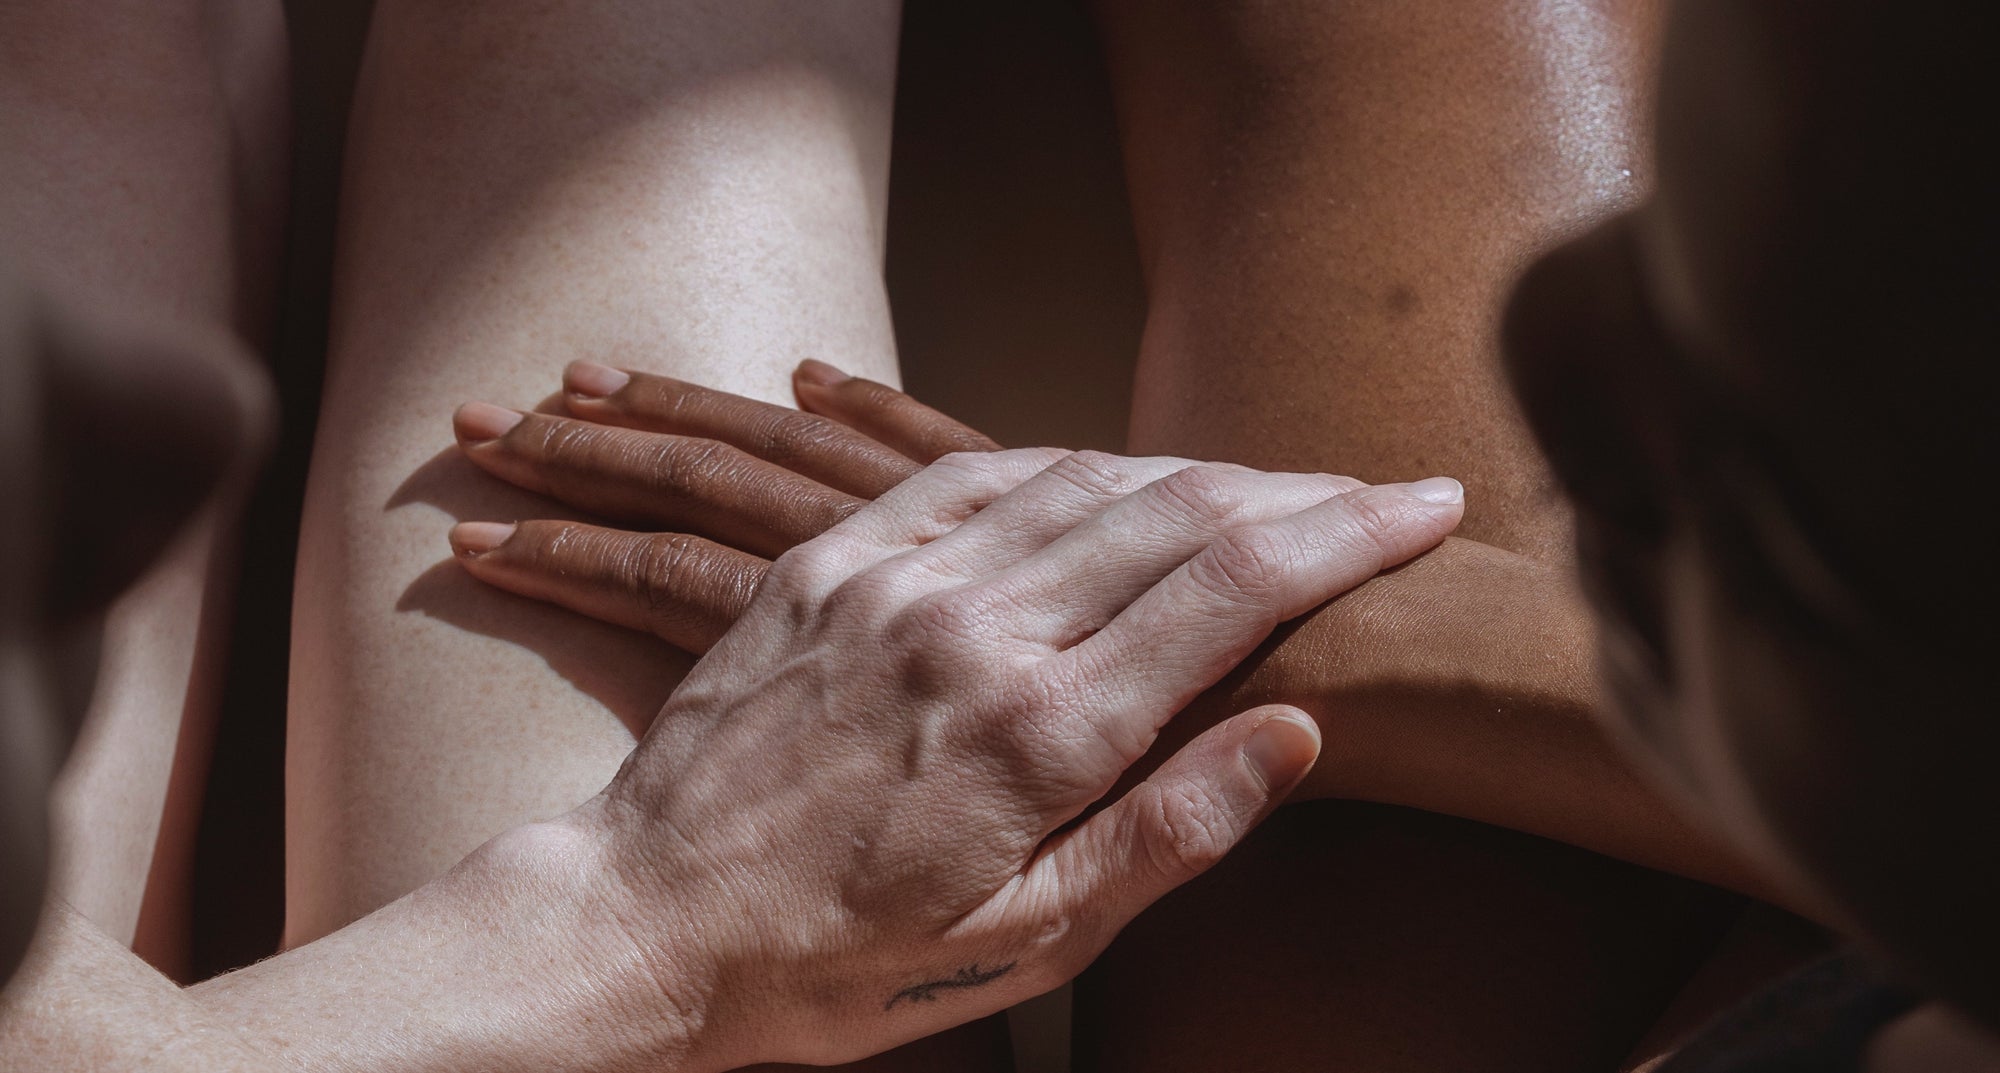 Does Our Sex Influence Our Skin?